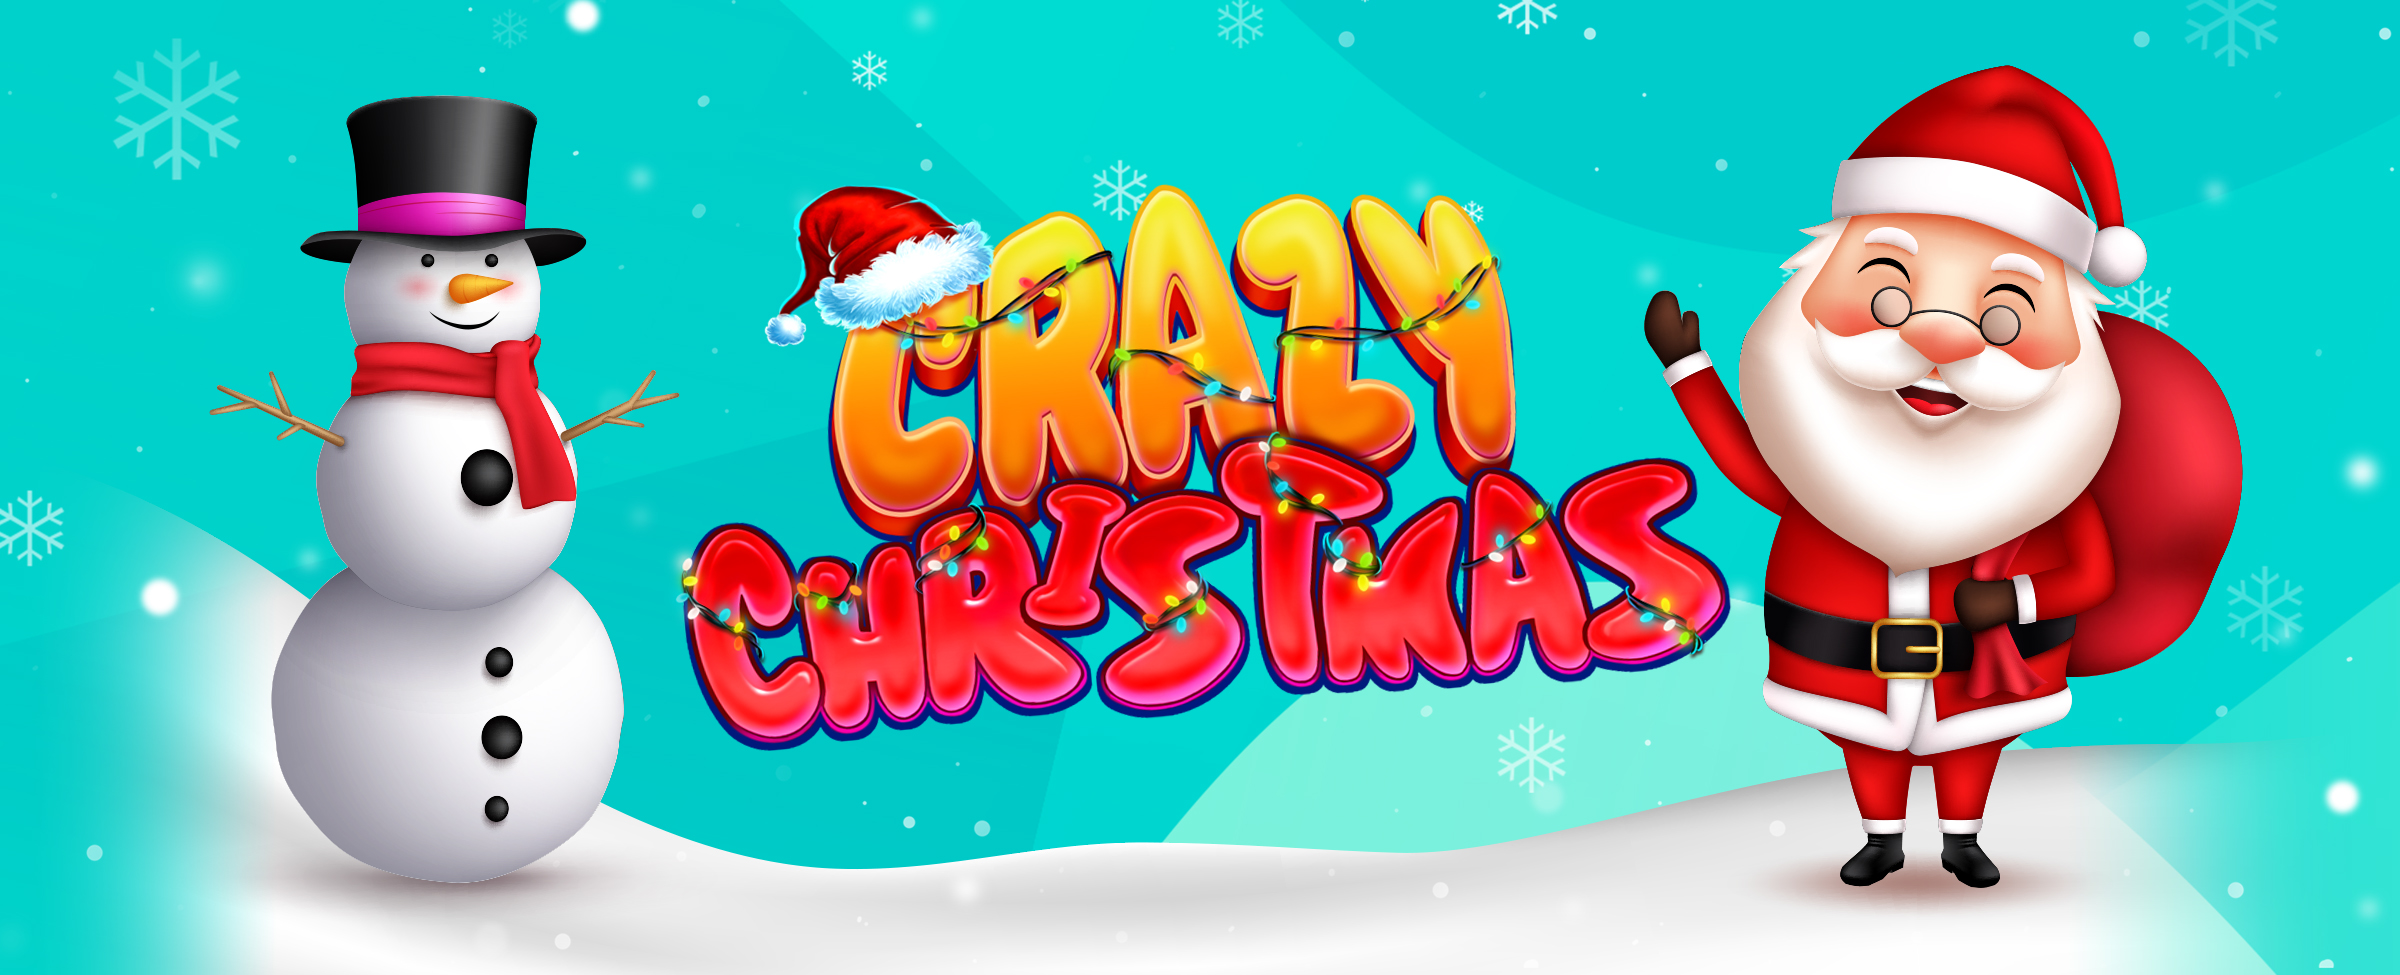 Front and center in the image are the words “Crazy Christmas”, the logo from the SlotsLV slot game of the same name, with a 3D-animated Santa standing to the right, and a 3D-animated snowman to the left.